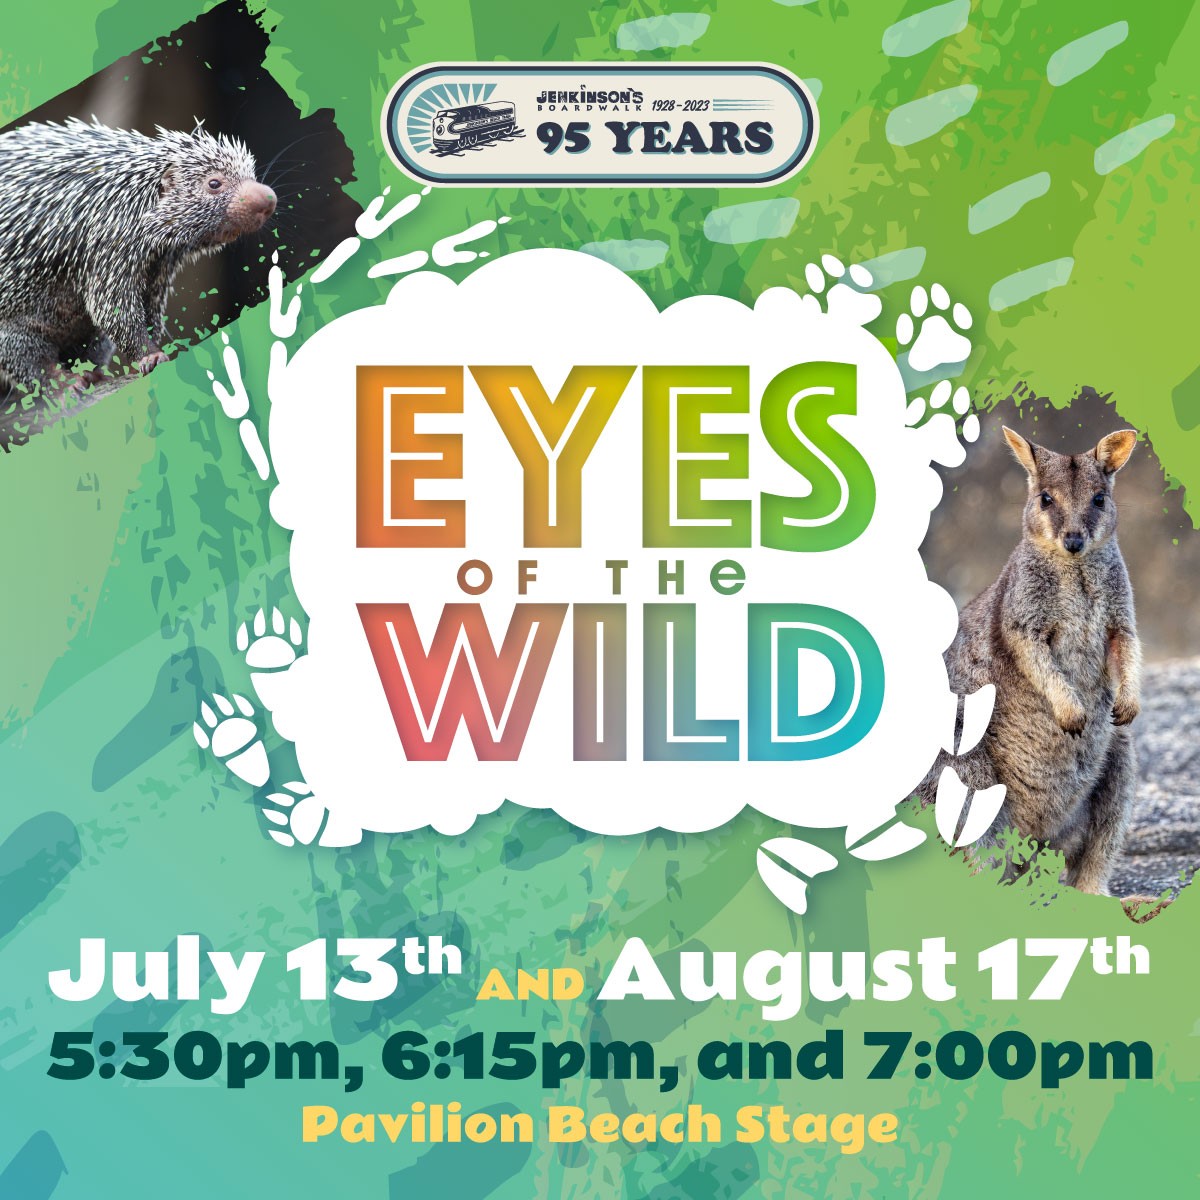 eyes of the wild animal show at jenkinson's boardwalk on july 13th and august 17th